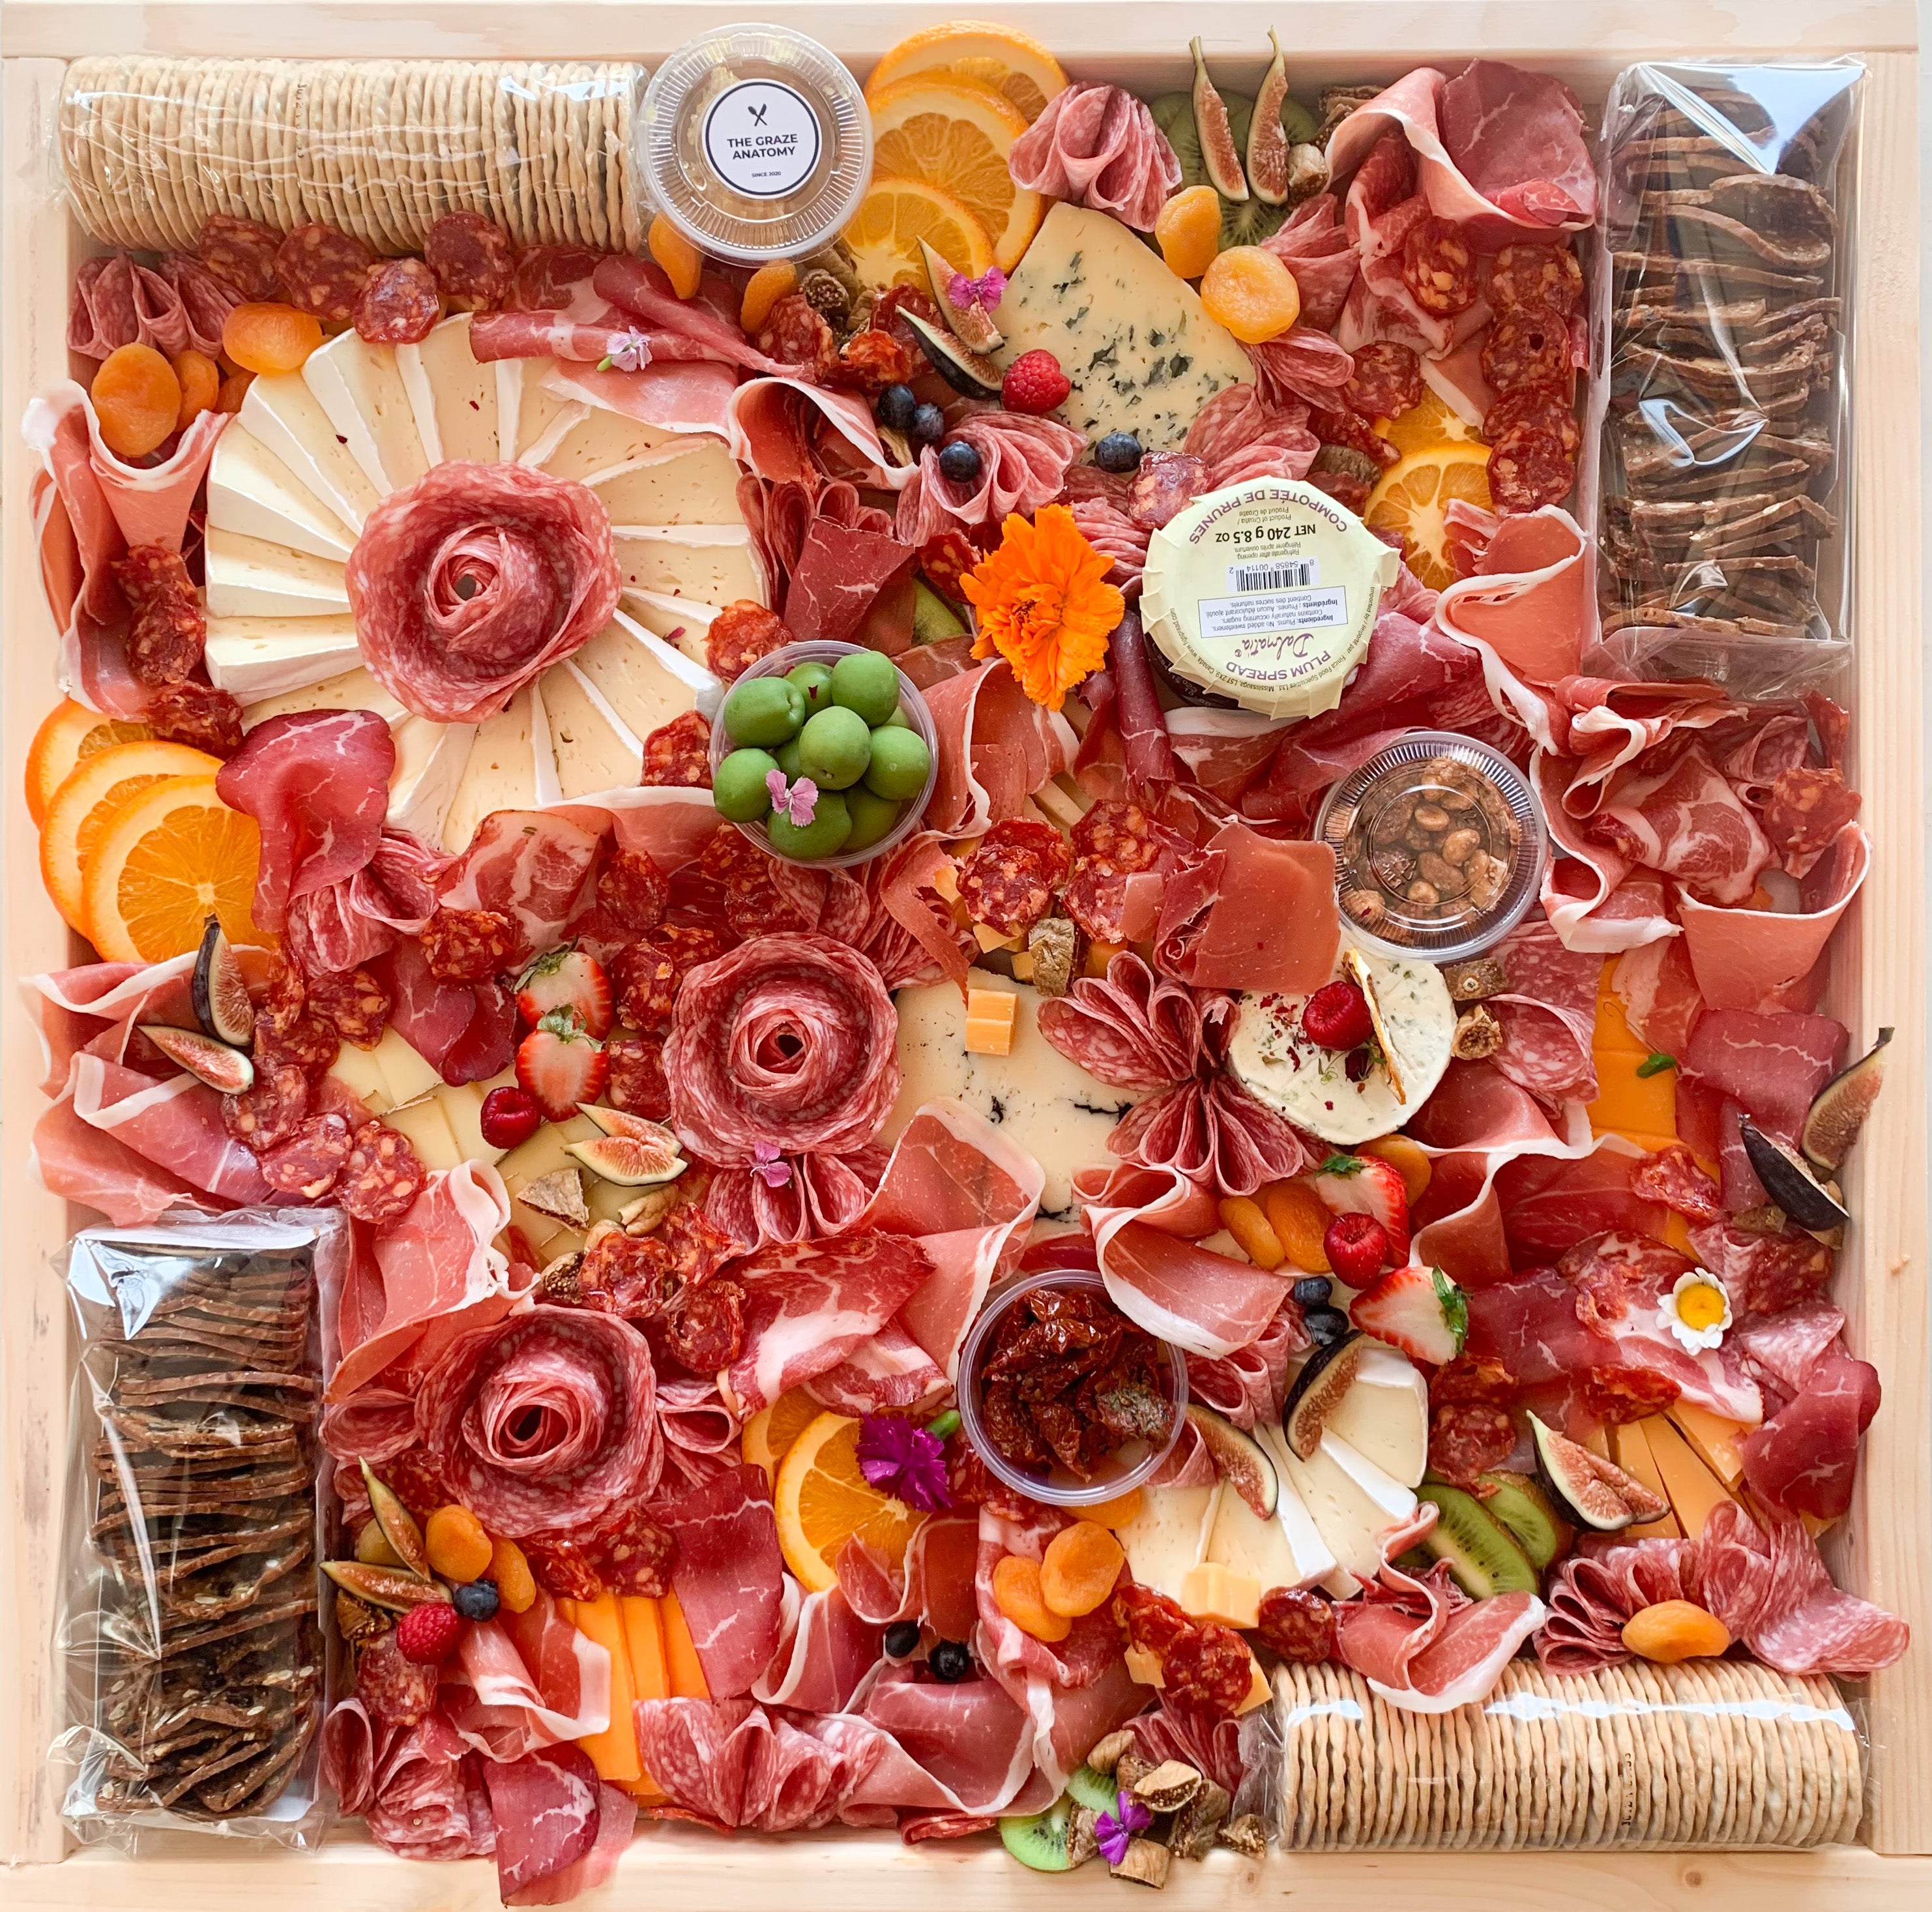 Best charcuterie board bundle for 30 - 35 guests Toronto Ontario